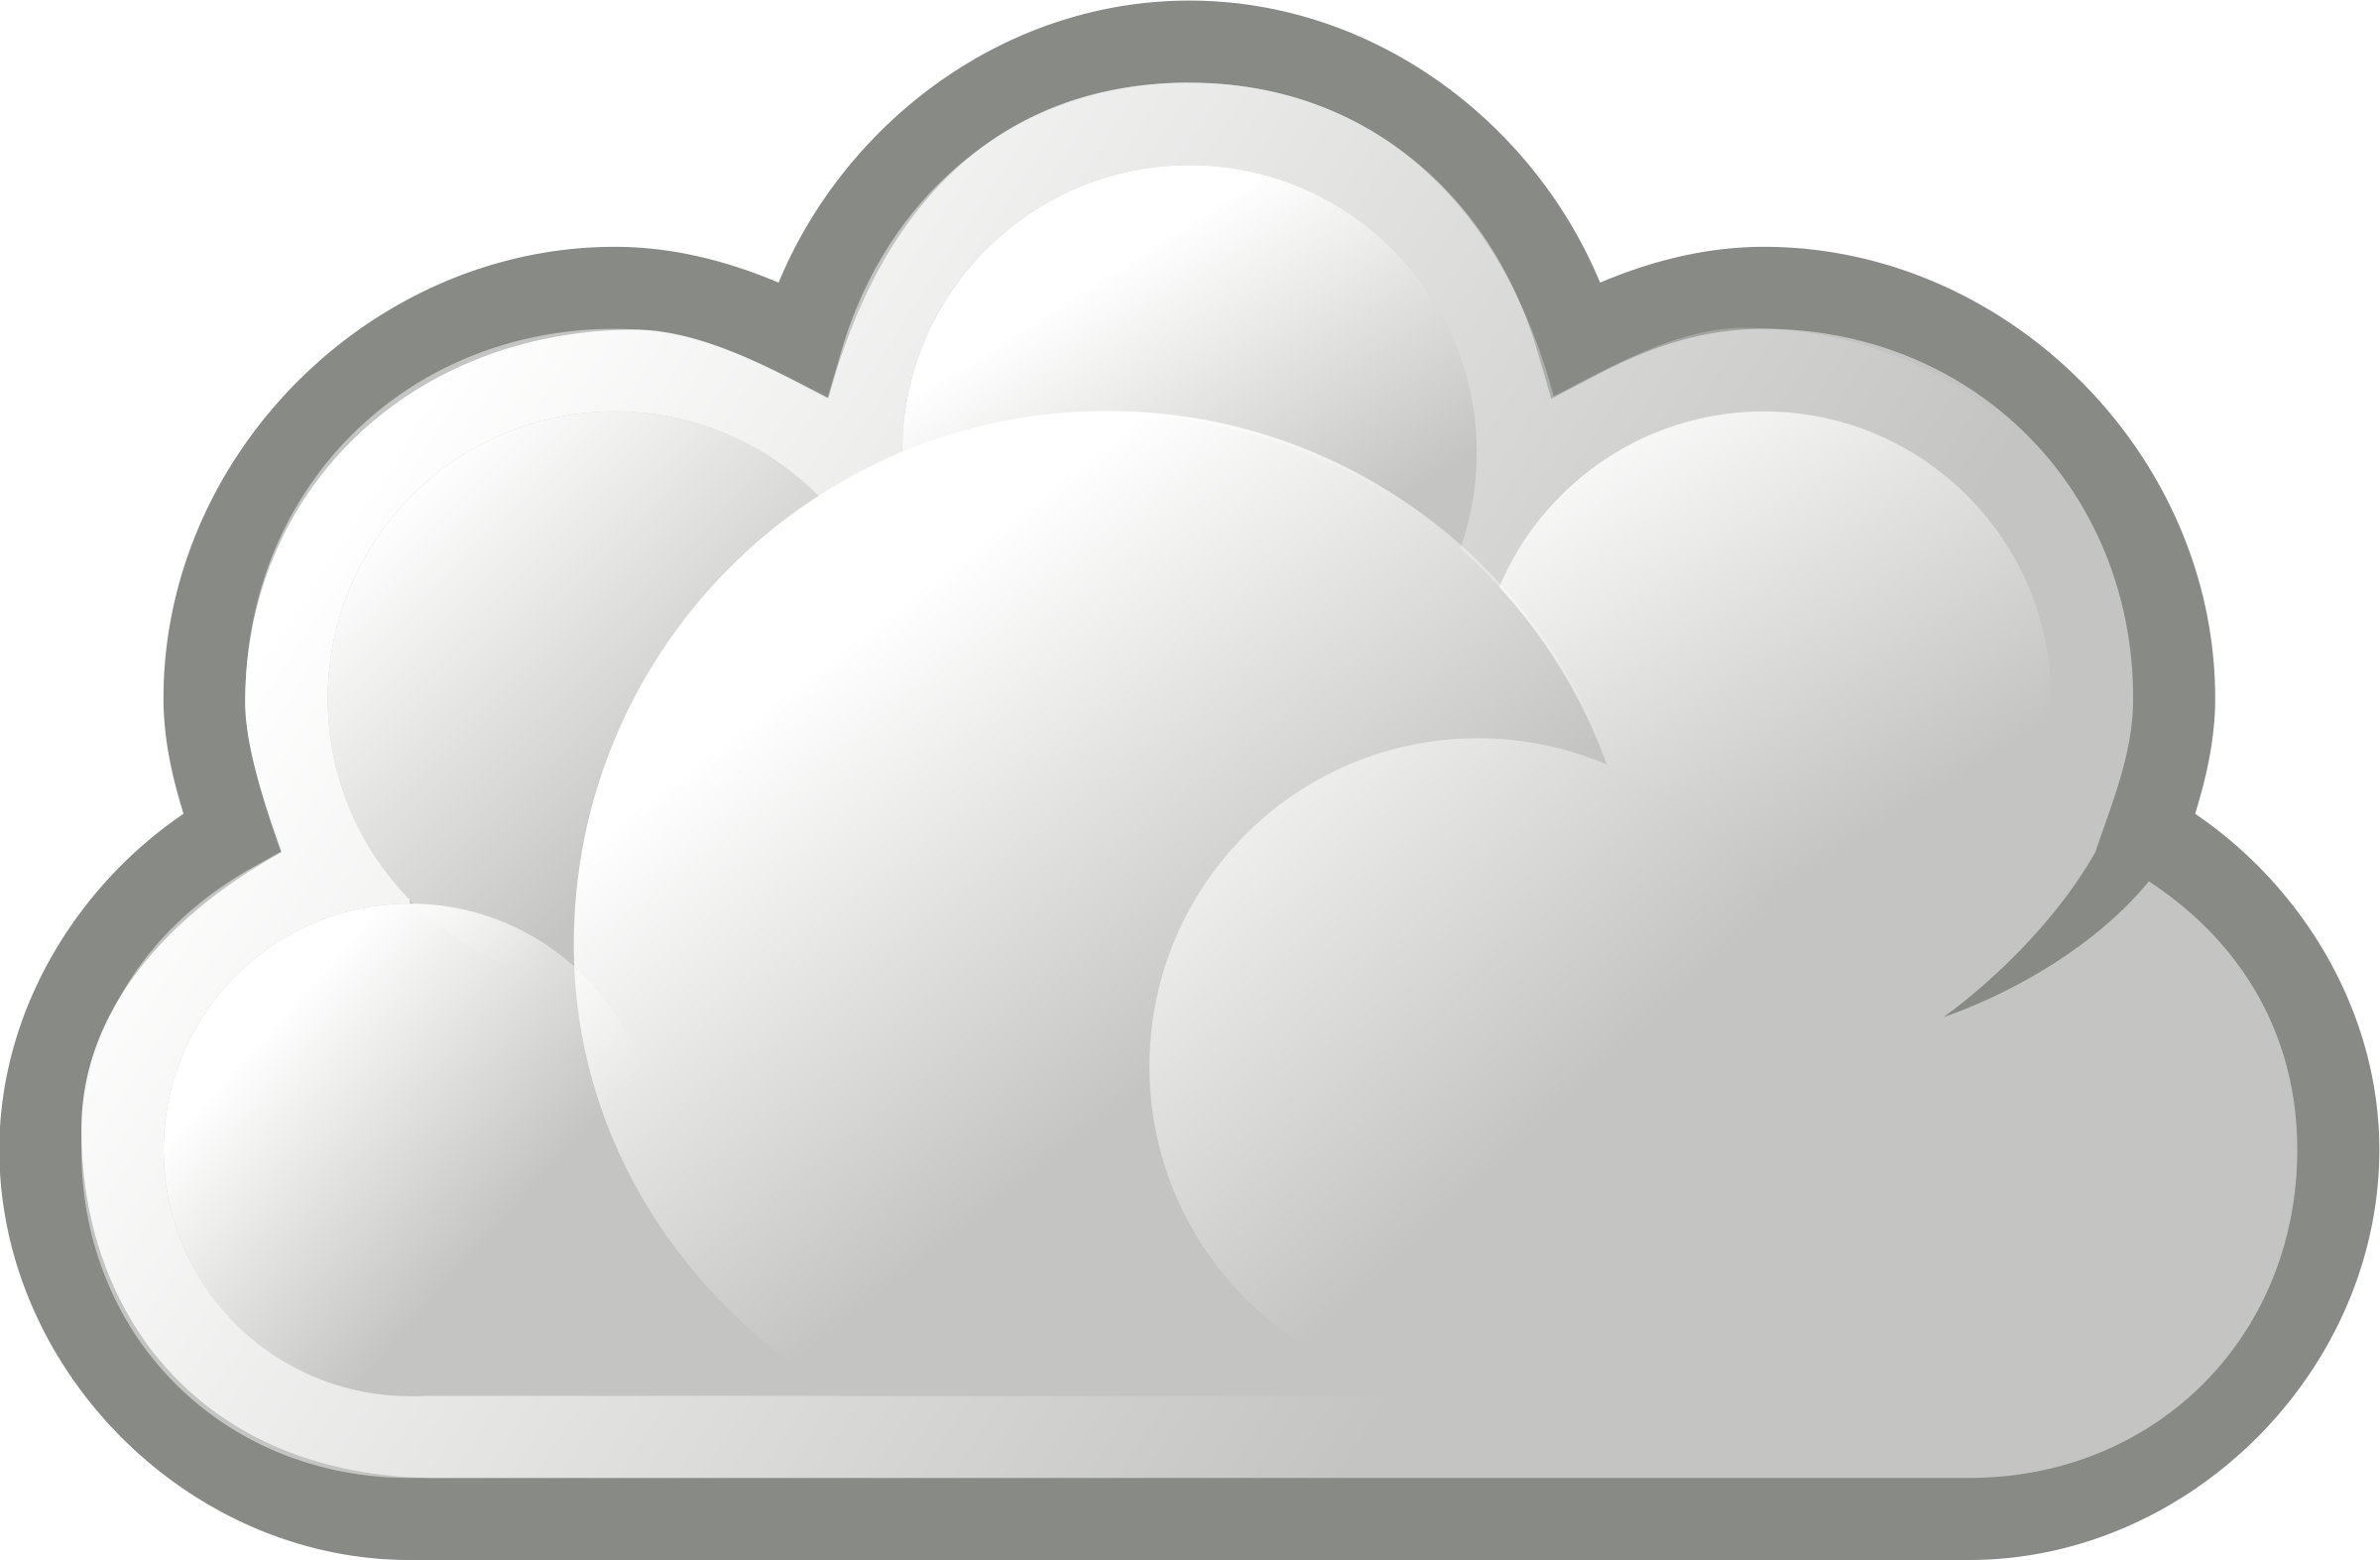 Cloud clip art free clipart to use resource